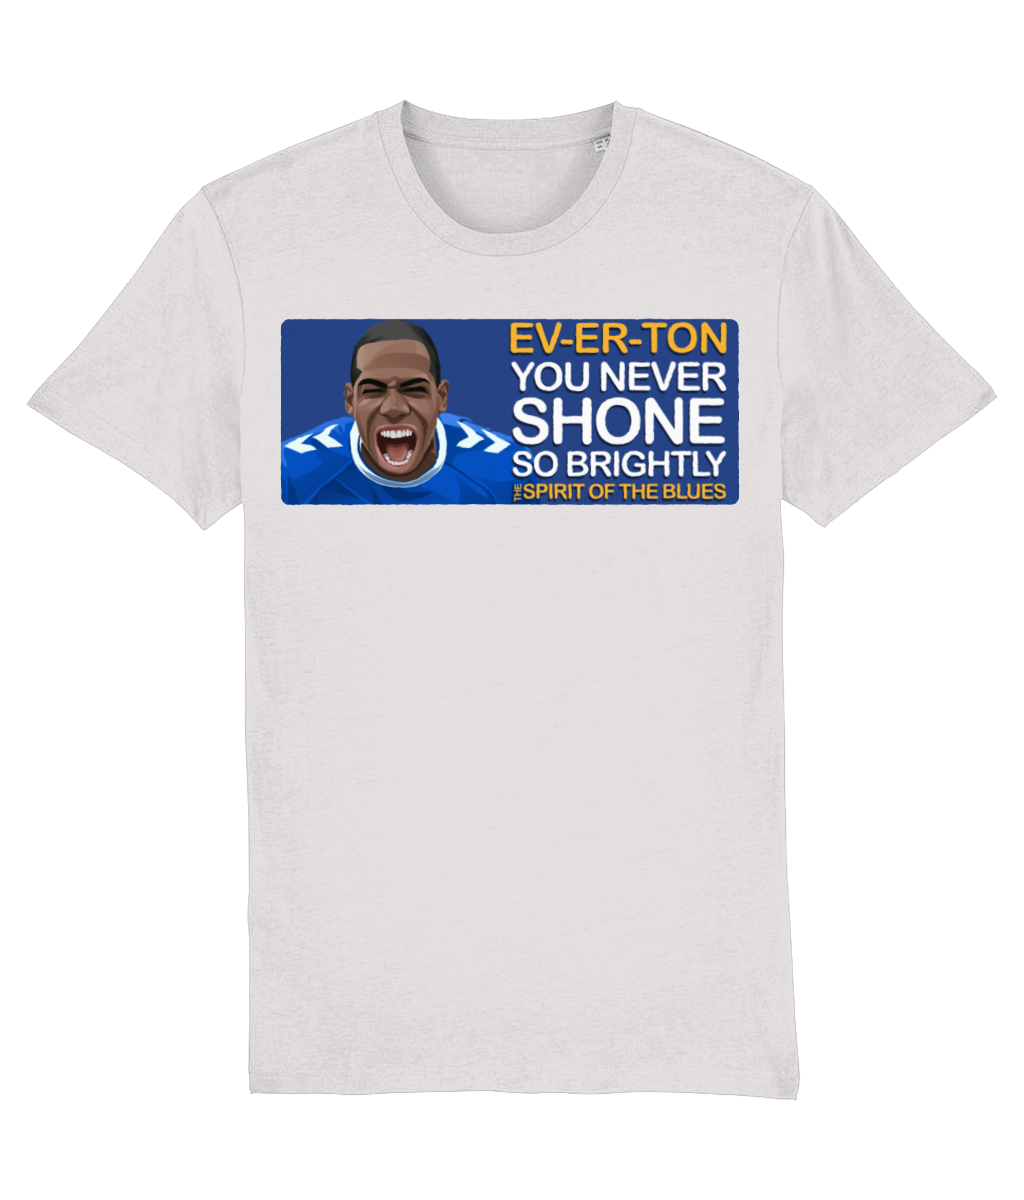 Everton Abdoulaye Doucoure The Spirit Of The Blues Unisex T-Shirt Stanley/Stella Retrotext Cream Heather Grey XX-Small 